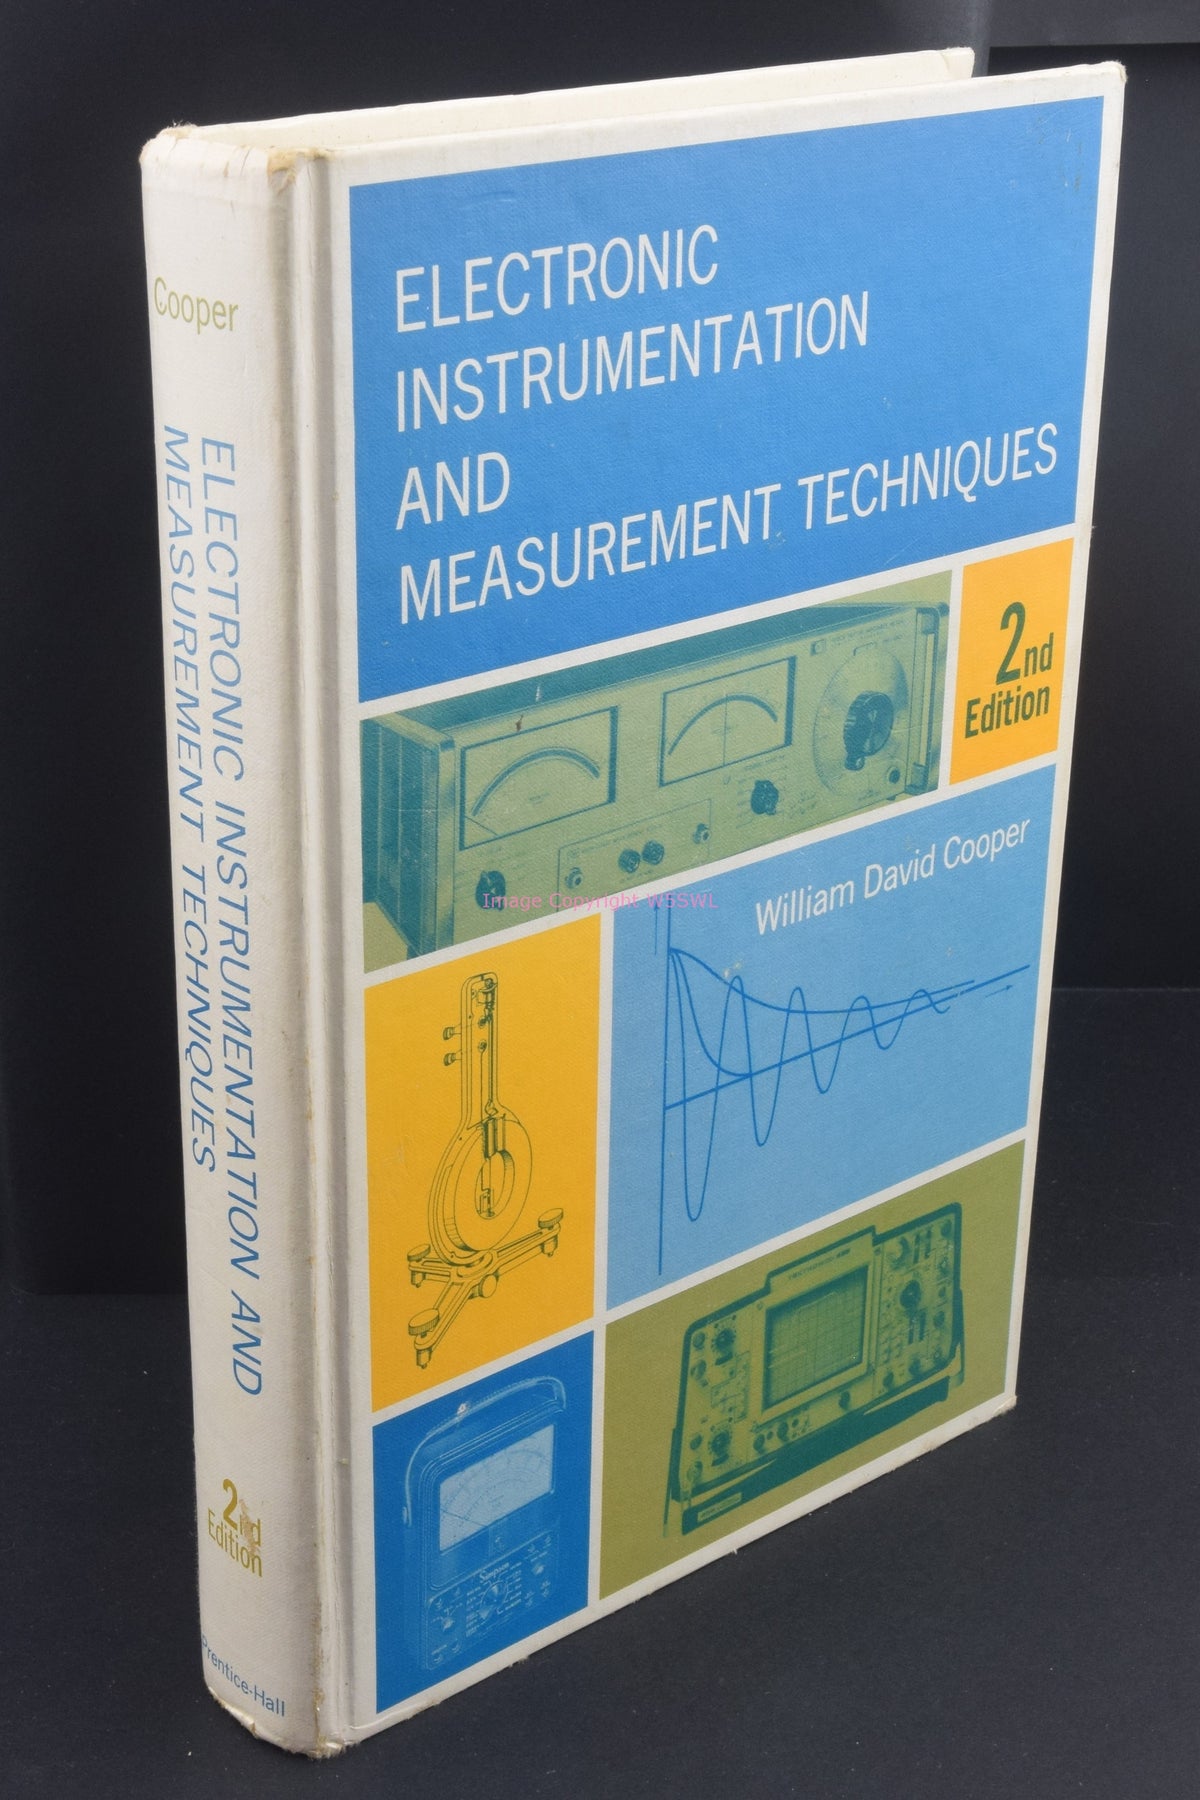 Electronic Instrumentation and Measurement Techniques 2nd William Cooper - Dave's Hobby Shop by W5SWL